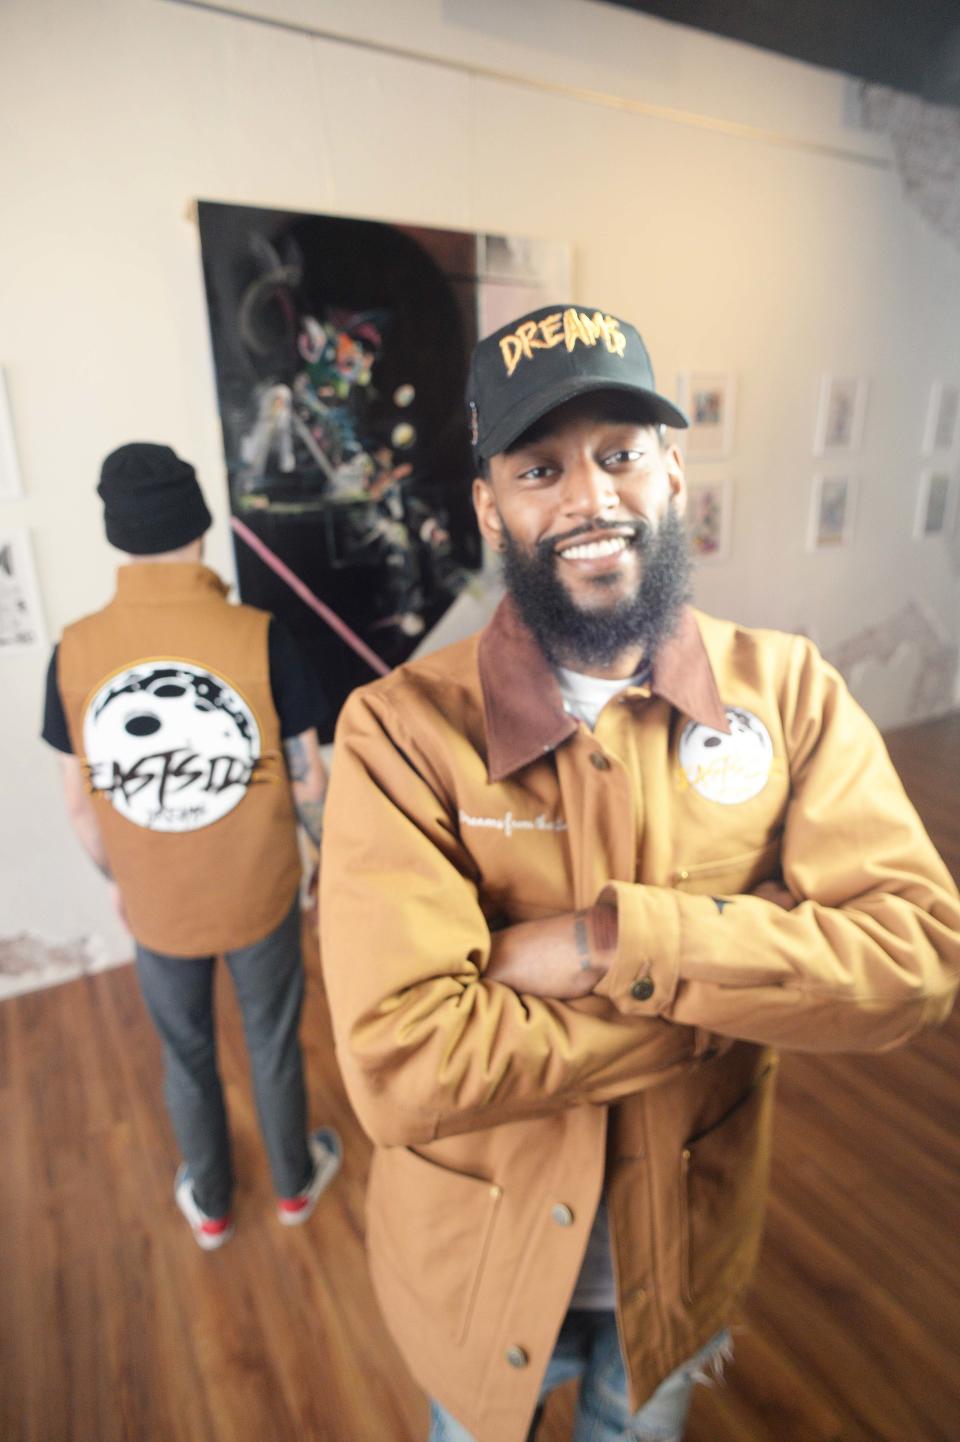 Freddie Mendes of Brockton, founder of Dreams from the East, a streetwear company, stops by his friend Ryan Jones’ tattoo studio, Real Art Studios, at 31MainSt. In Taunton April  29, 2022. From left, Jones and Mendes.